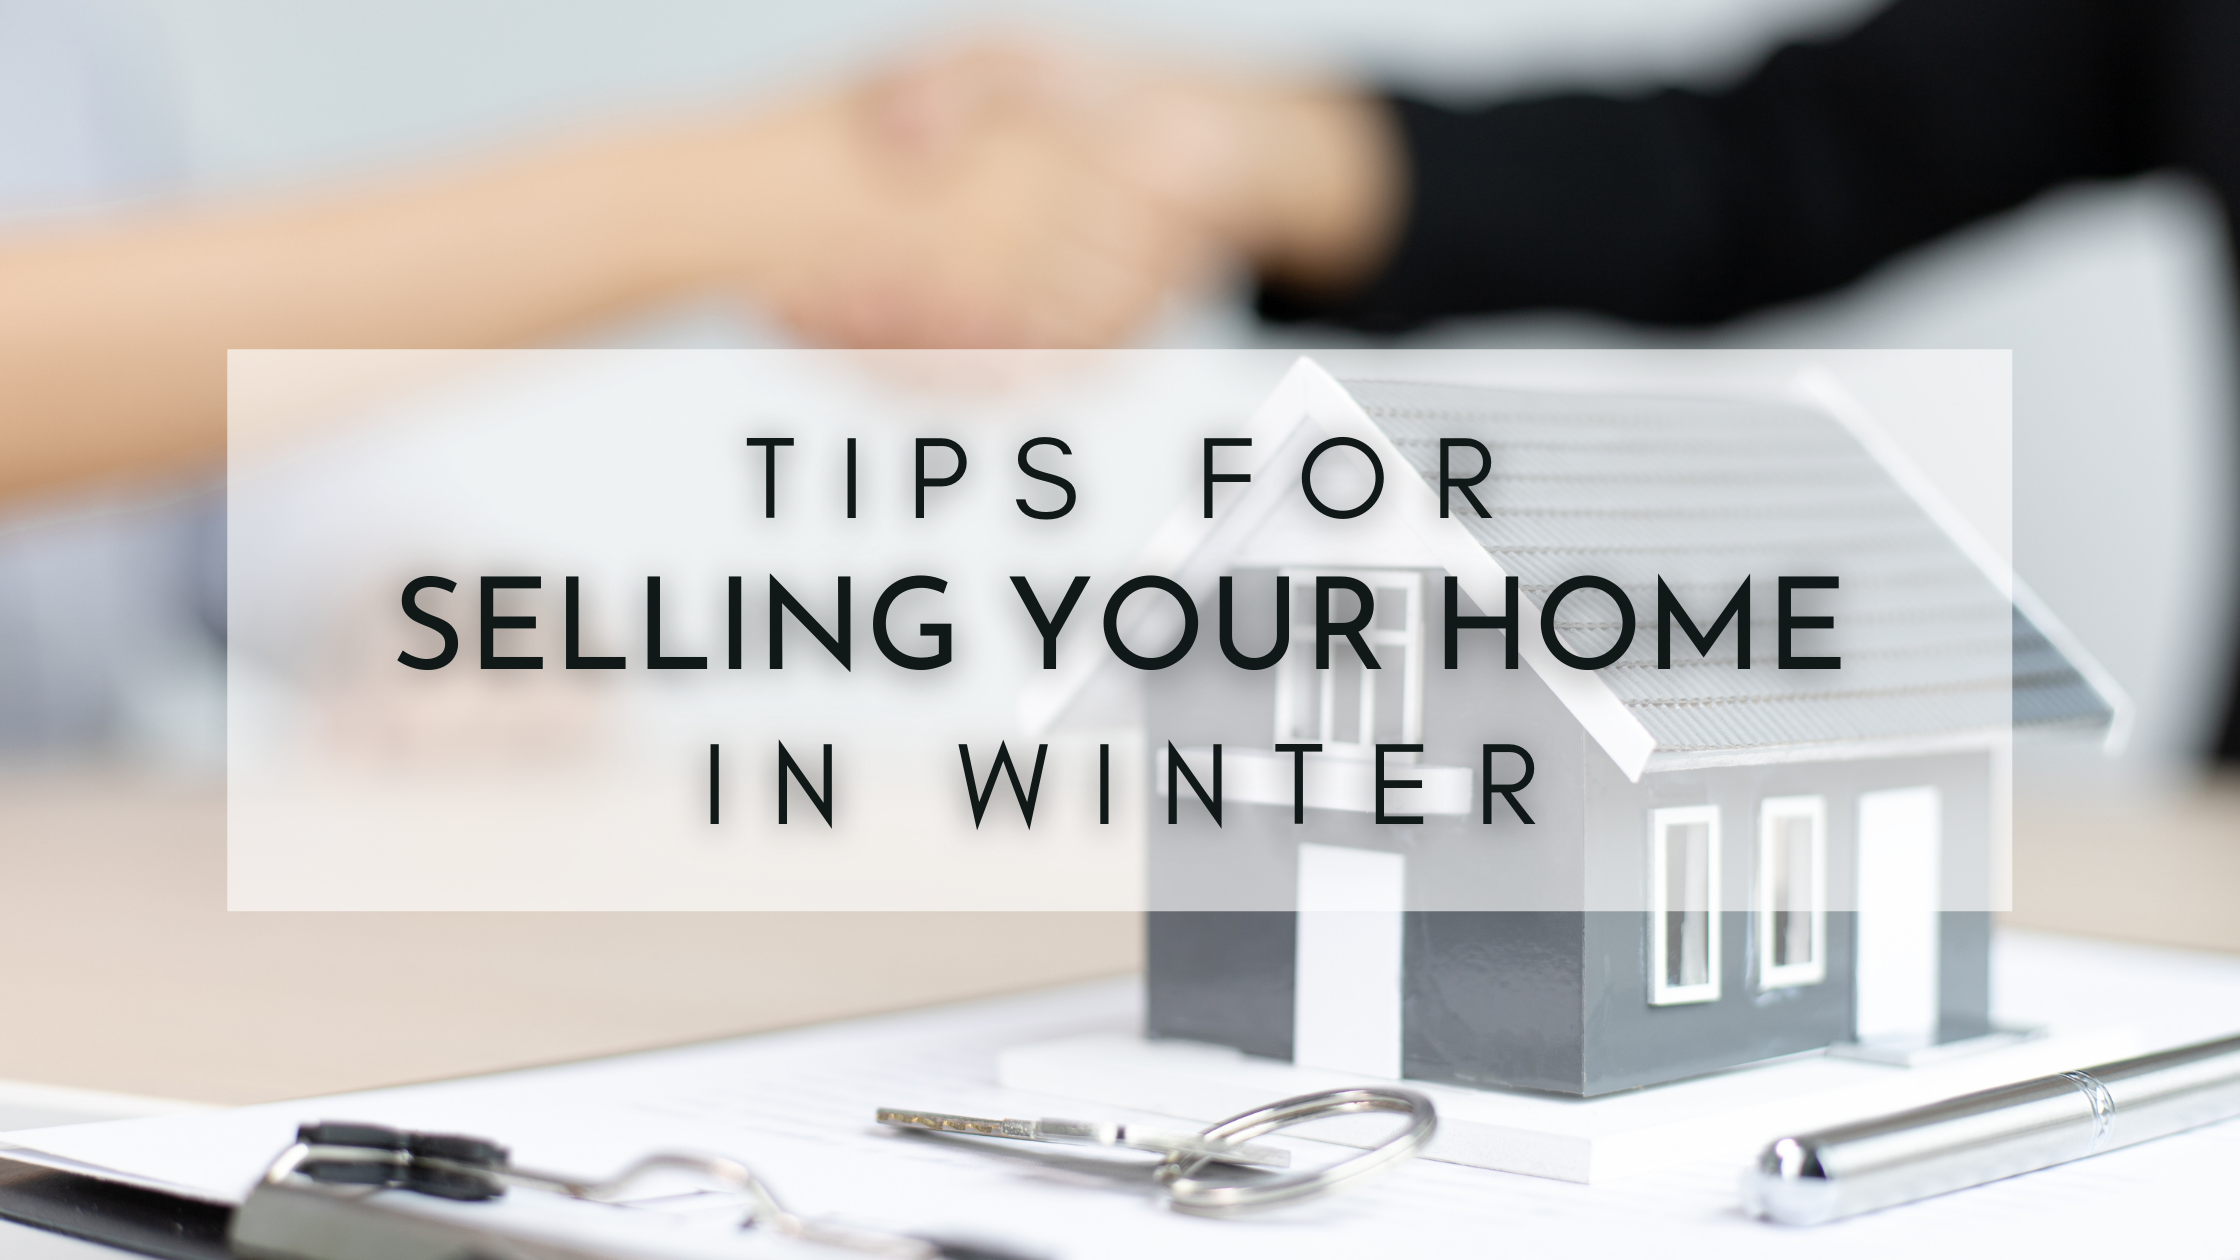 Tips for Selling Your Home in Winter